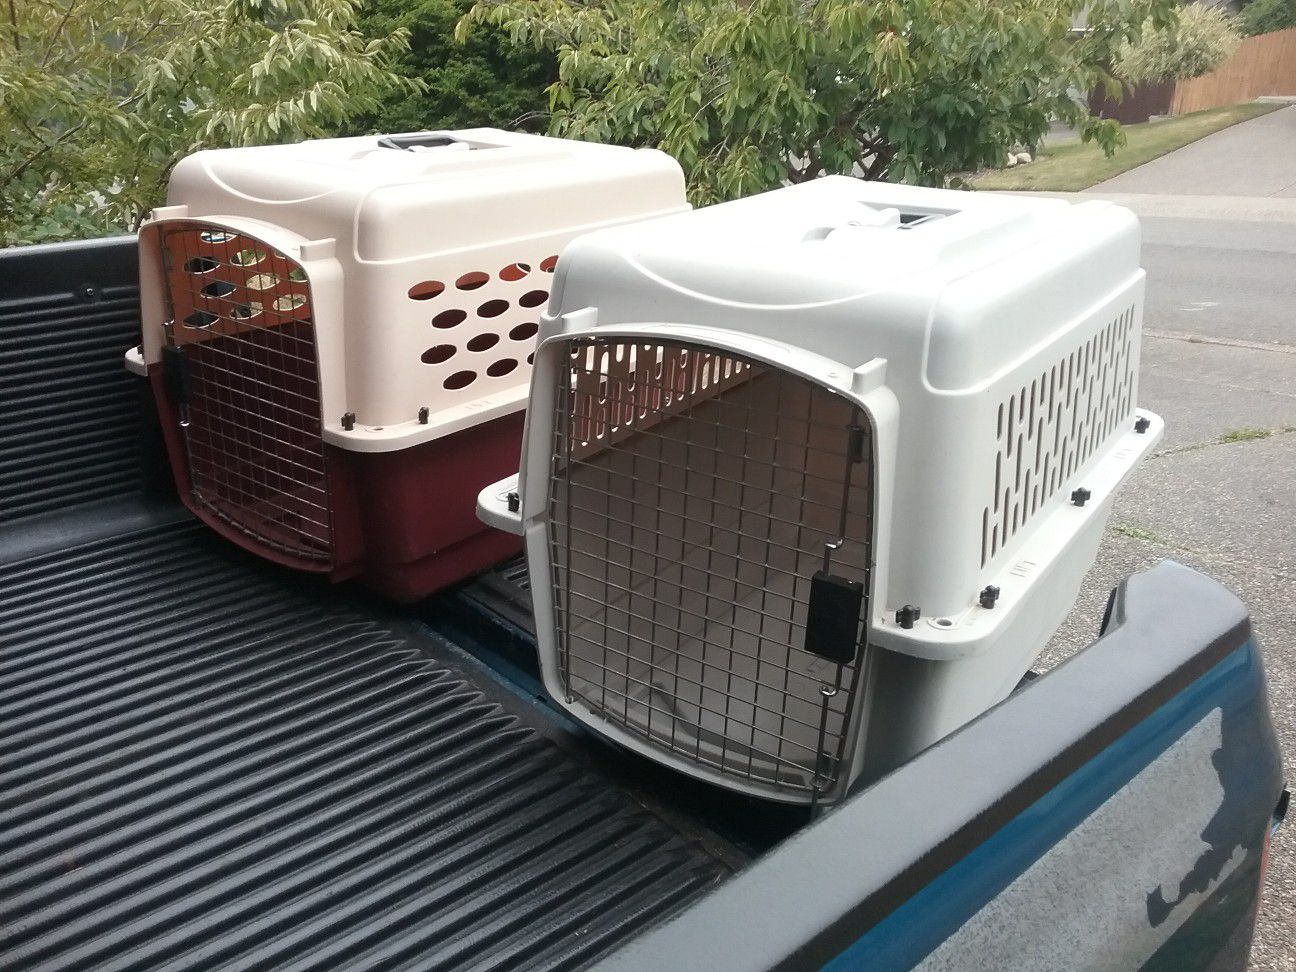 Medium Dog Kennel Crate Carrier Airline Approved like New 28" L by 20" W by 24" H $35 Each